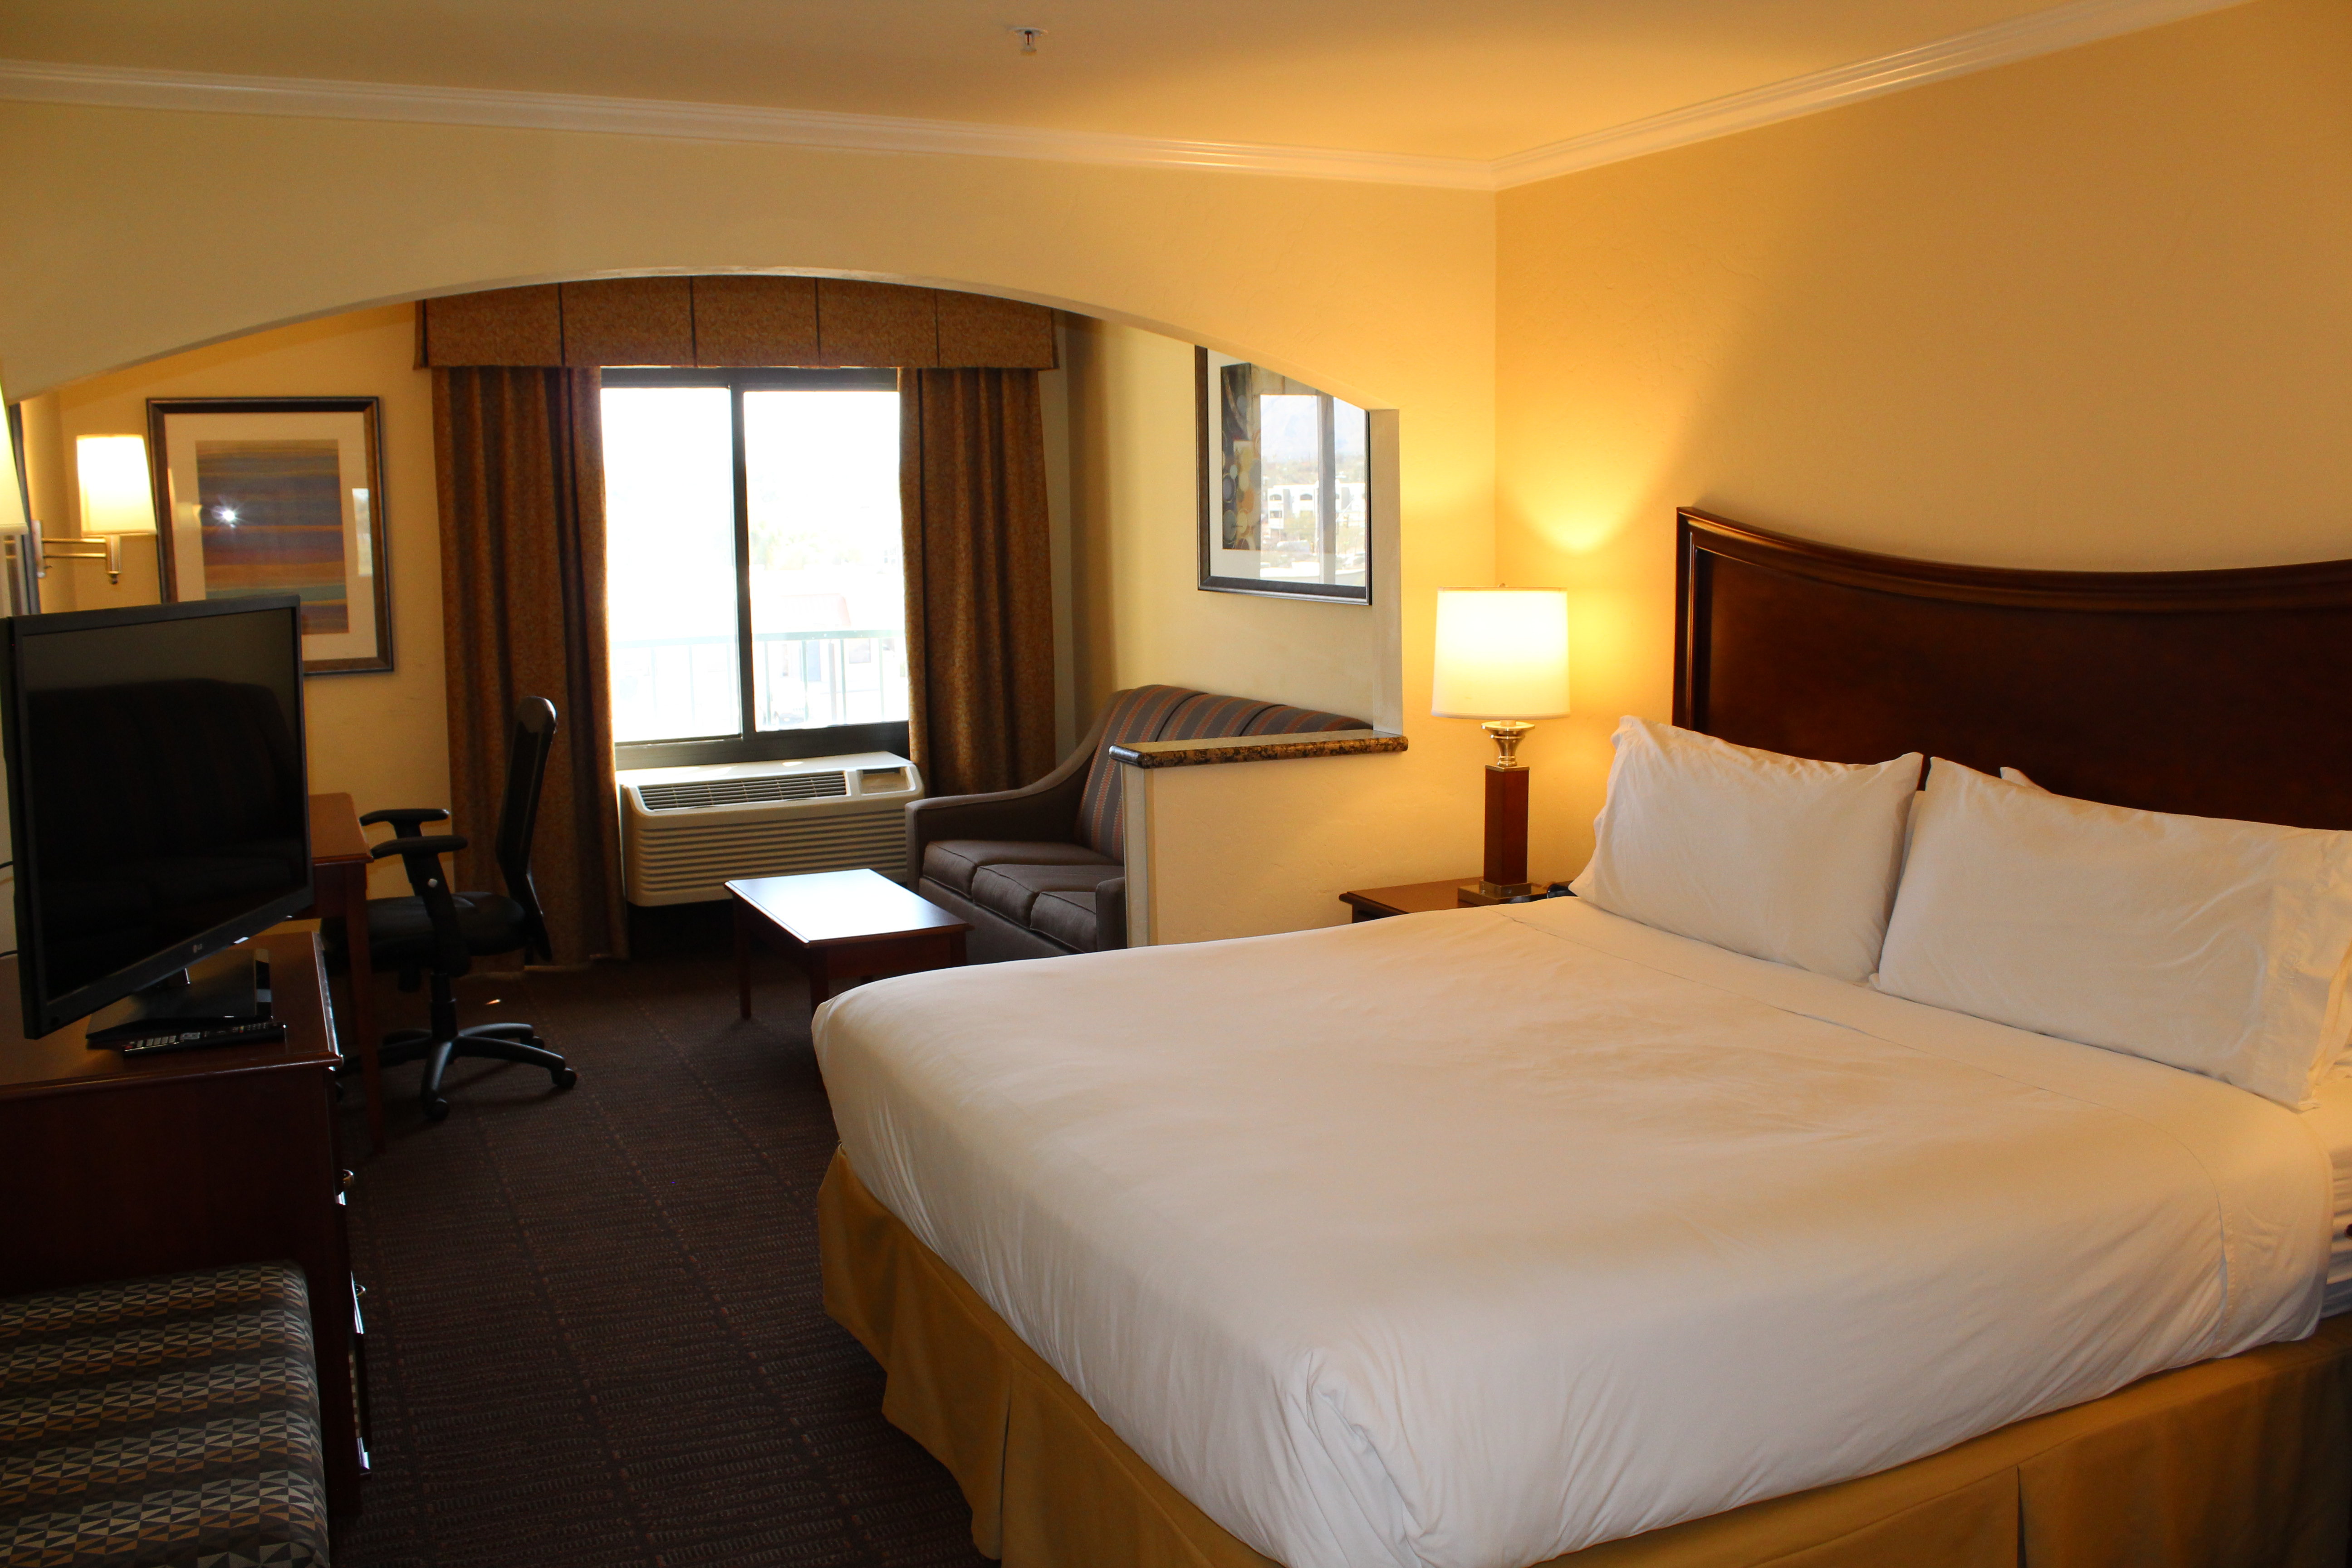 For extra space to stretch out and relax book our Suite room.